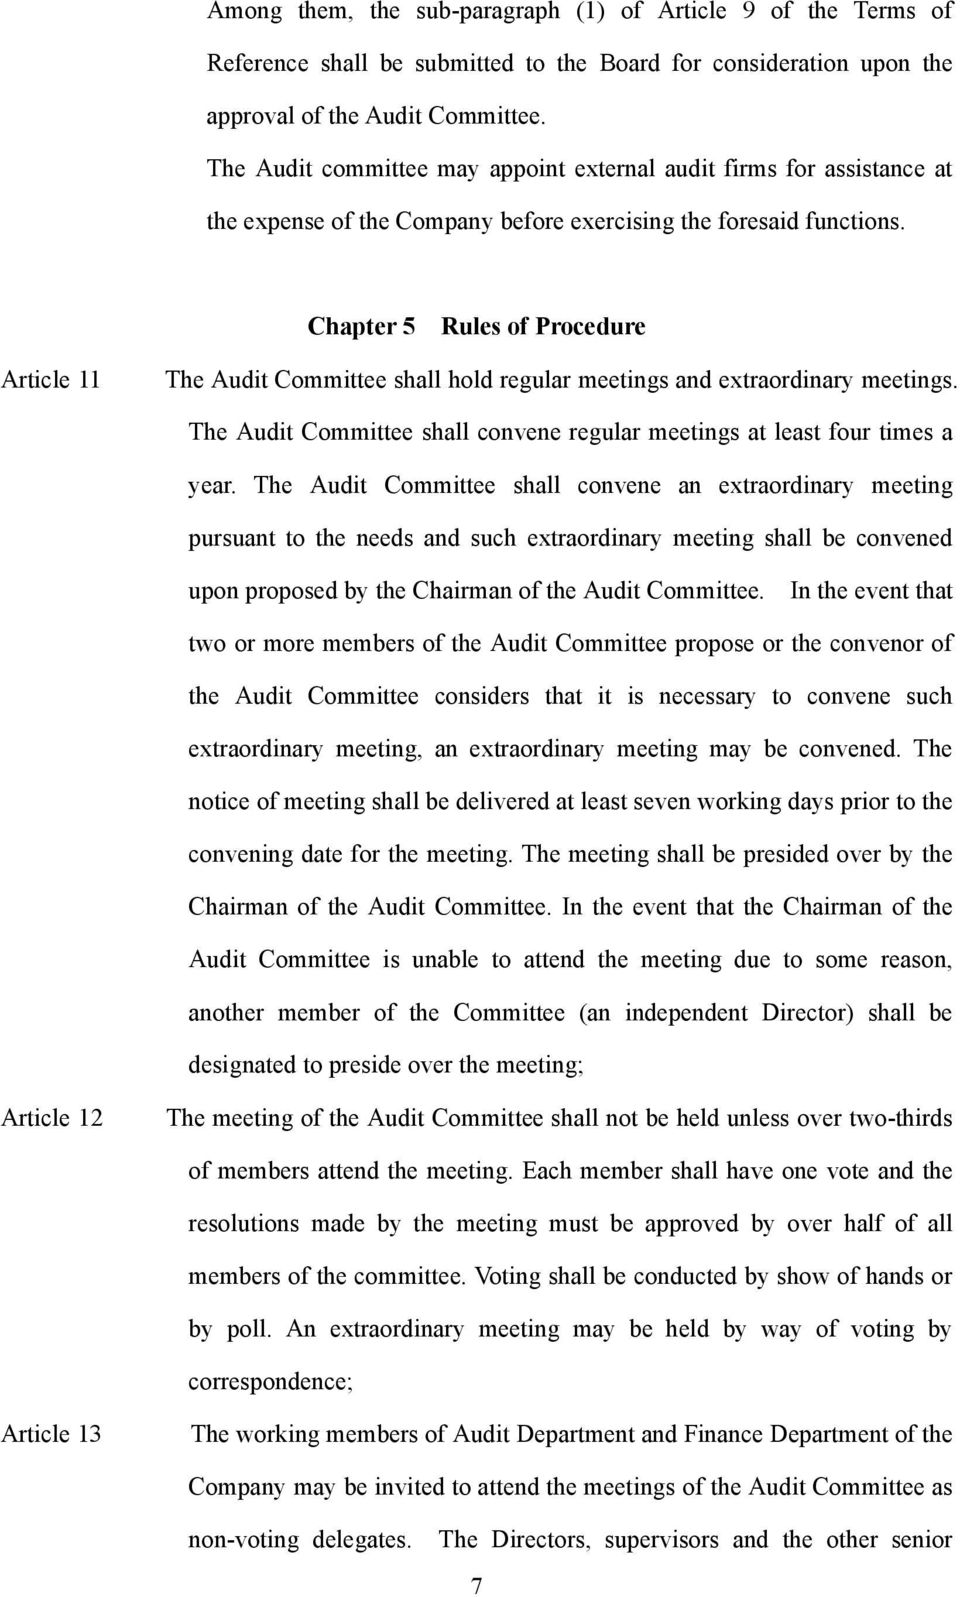 Chapter 5 Rules of Procedure Article 11 The Audit Committee shall hold regular meetings and extraordinary meetings. The Audit Committee shall convene regular meetings at least four times a year.